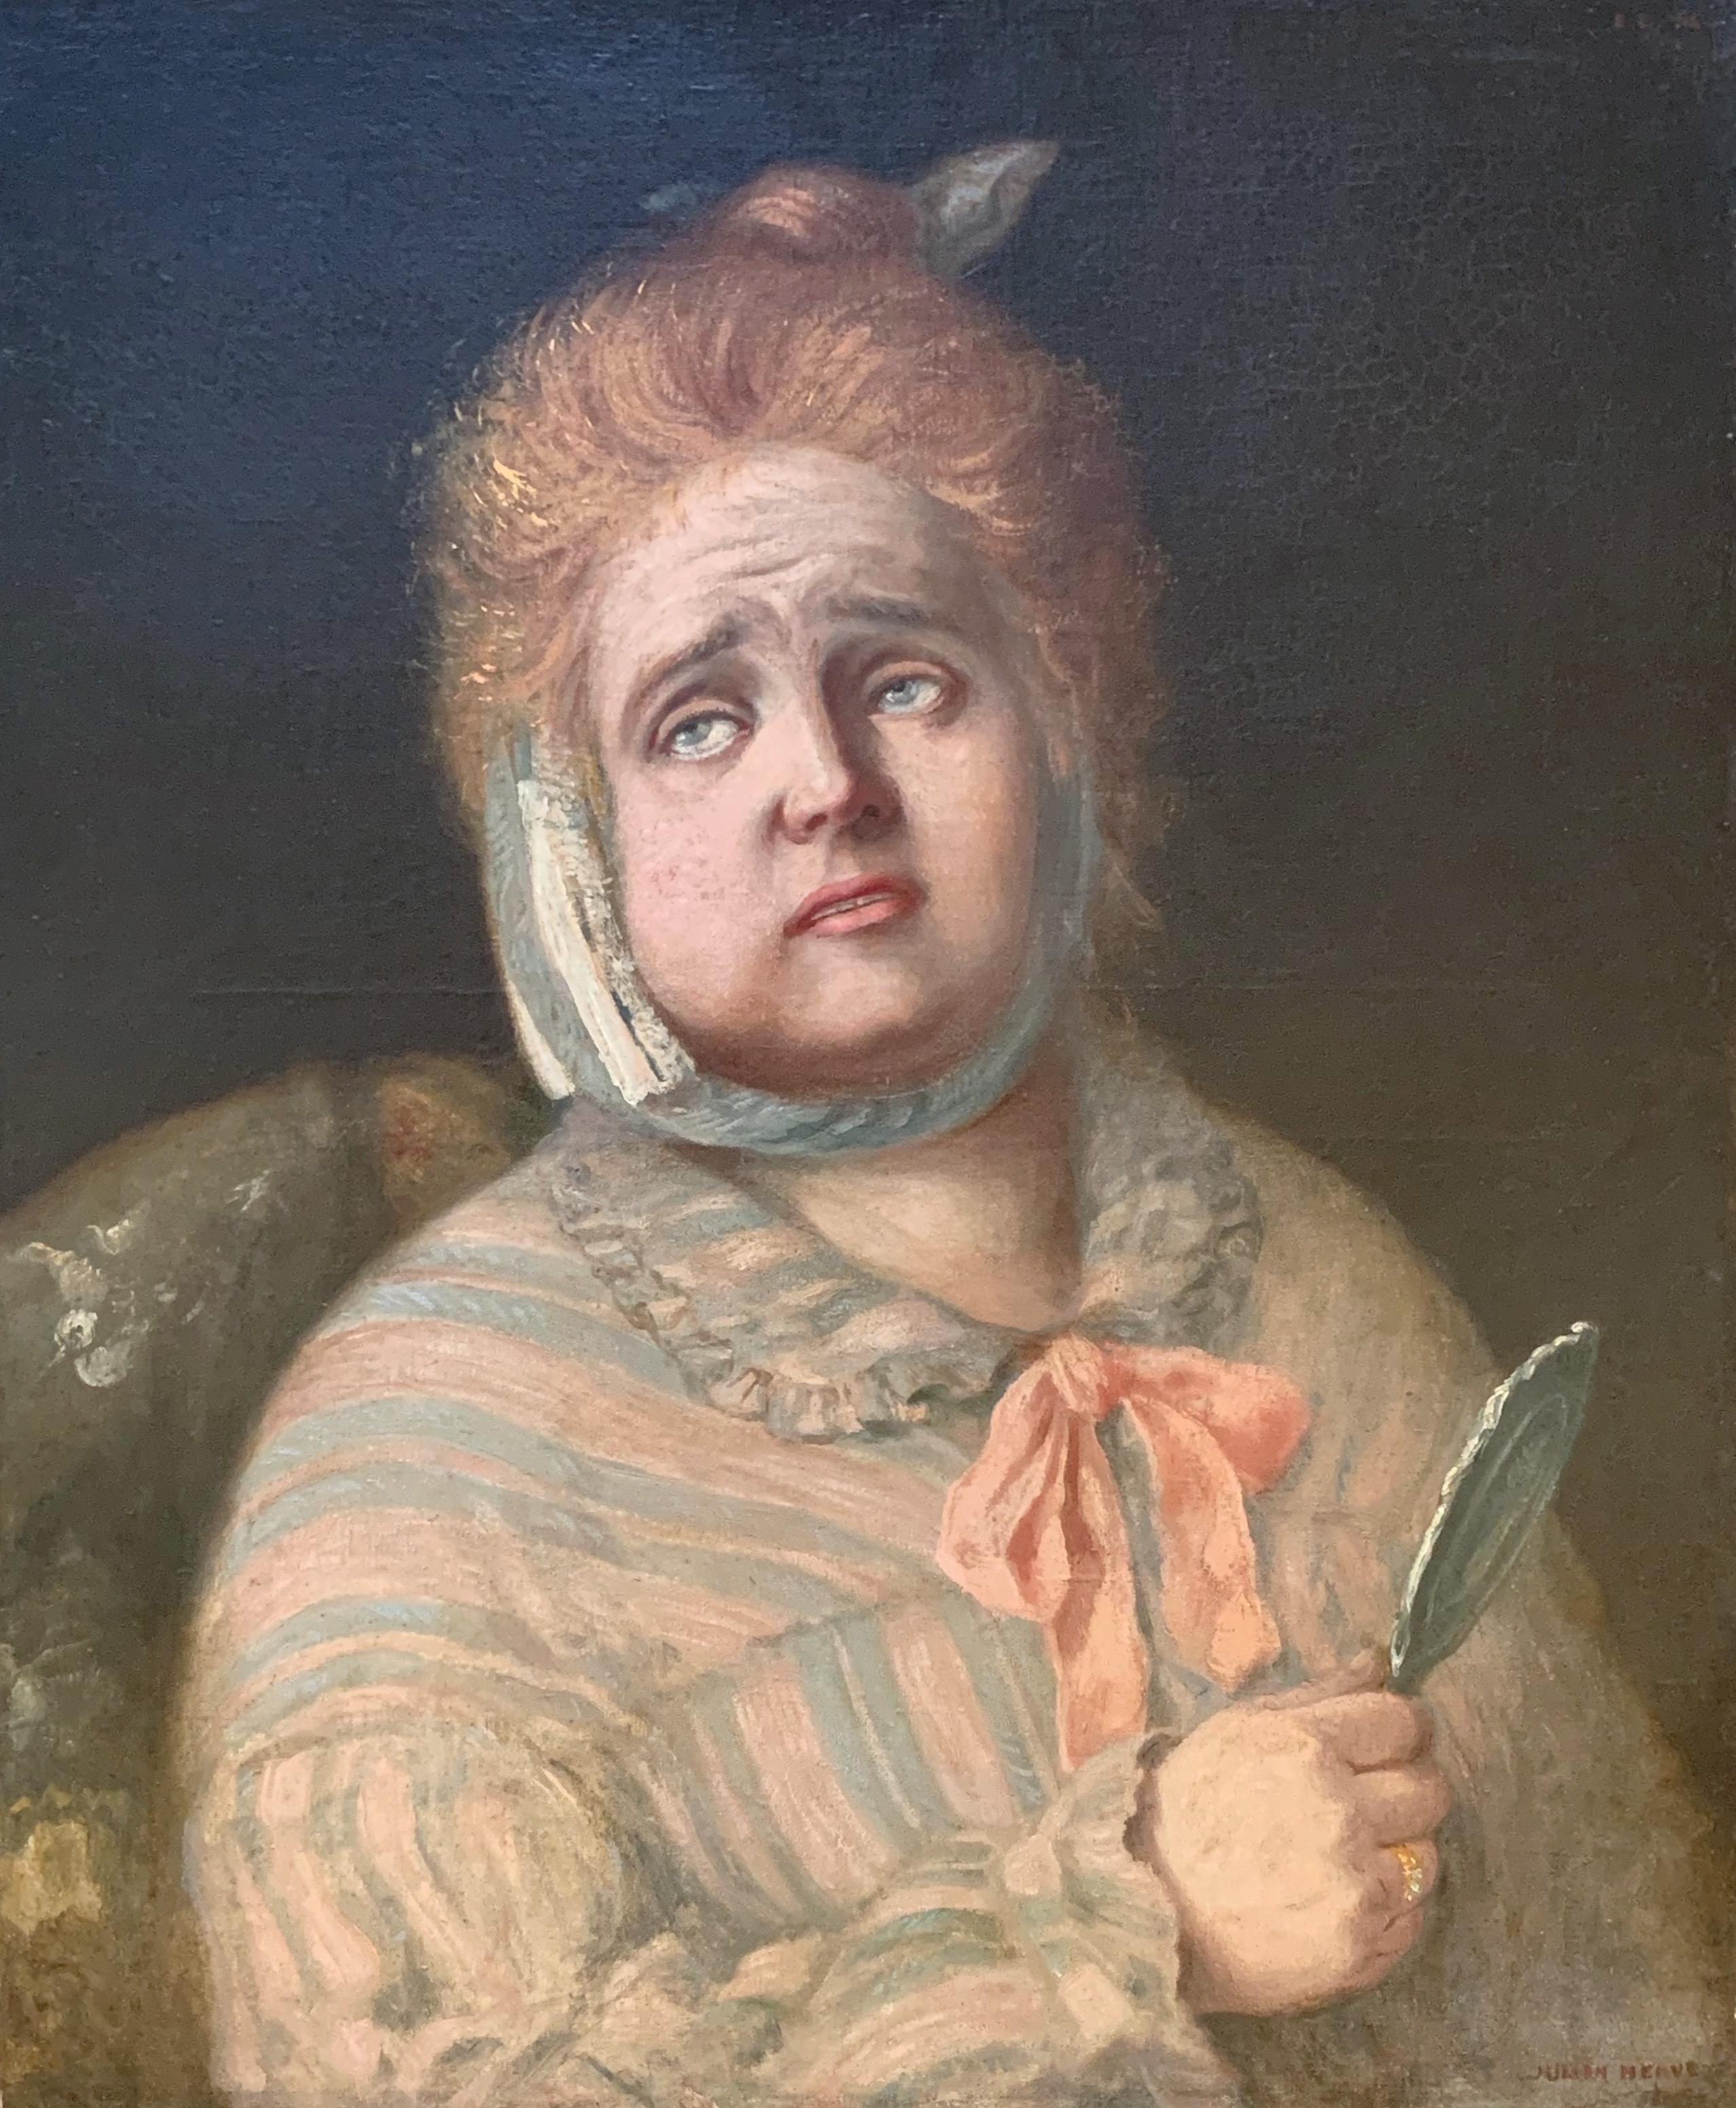 Portrait of a woman with a toothache, circa 1900, oil on canvas